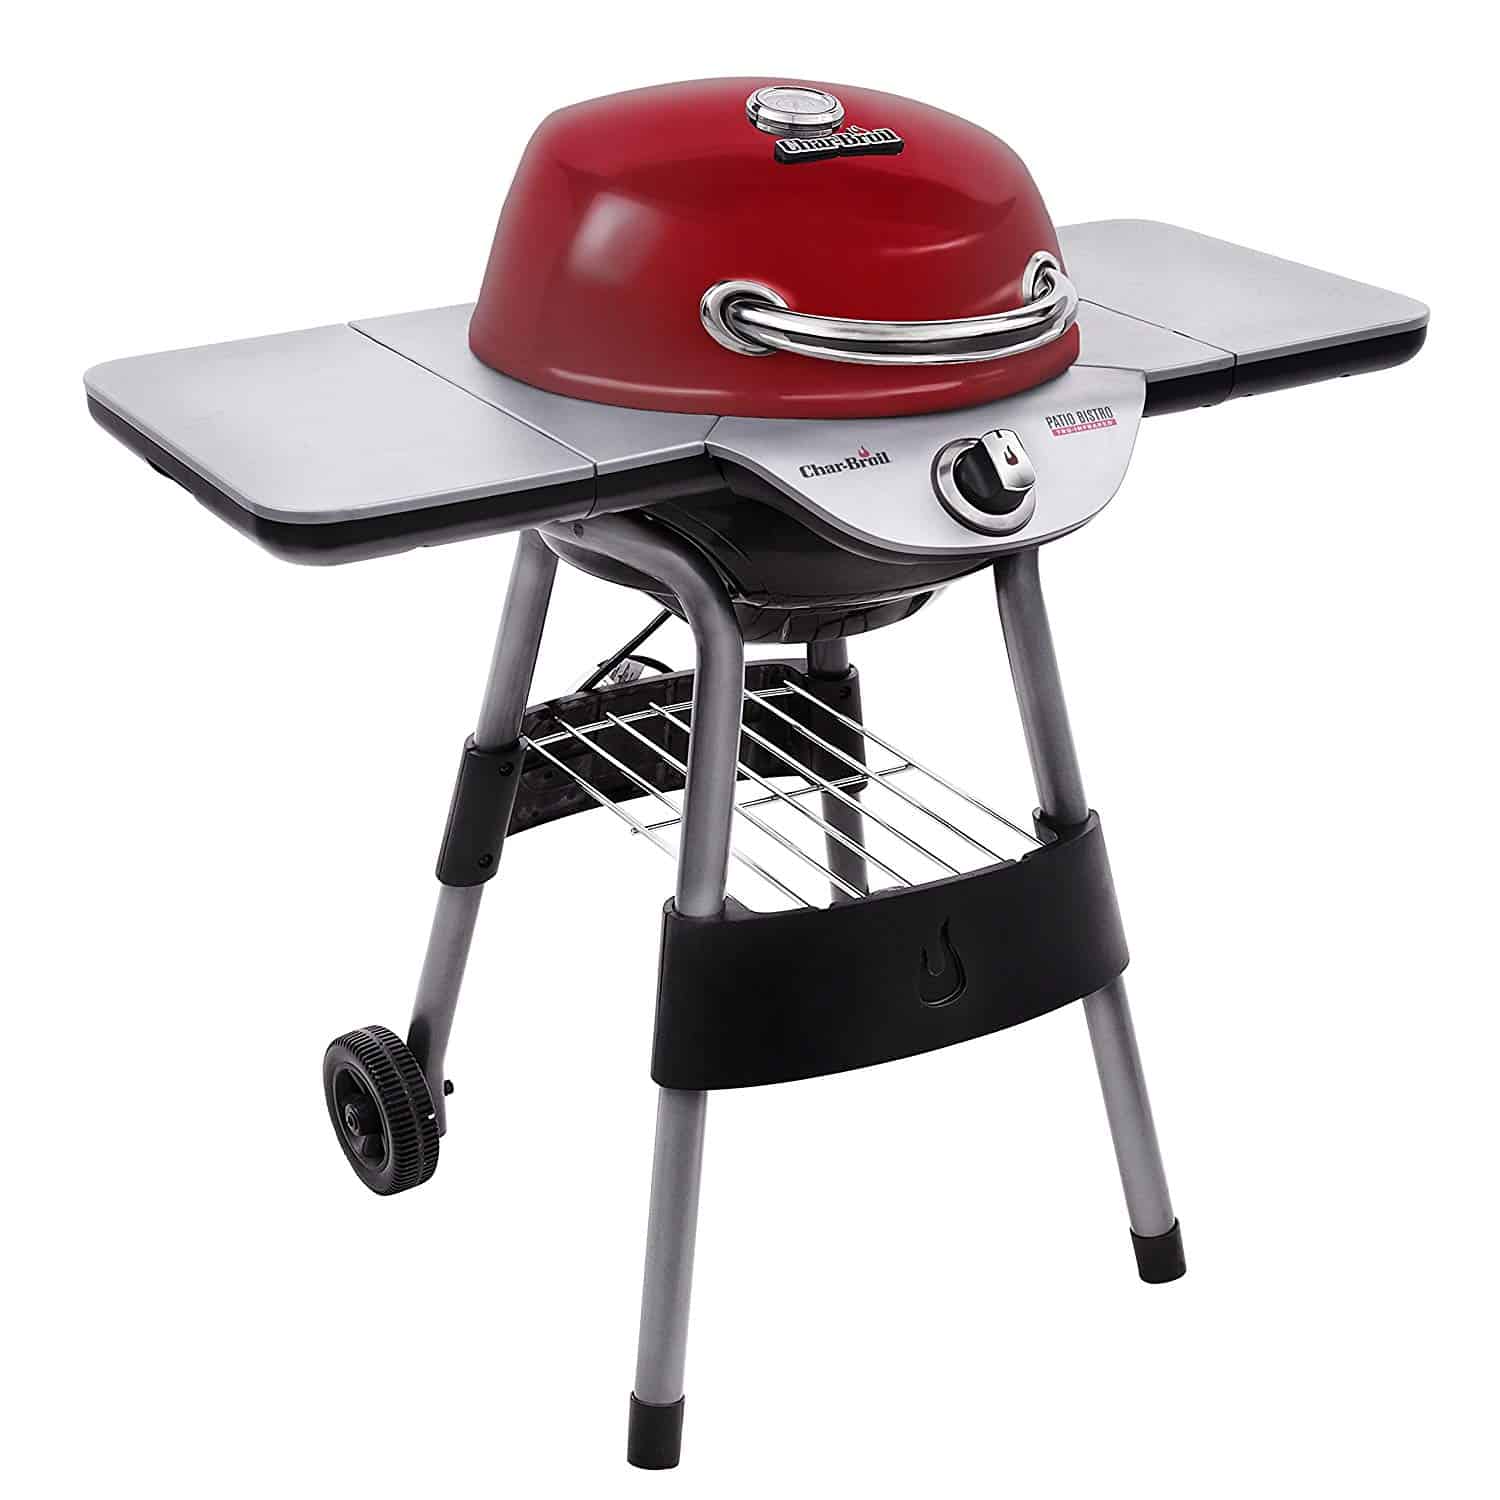 Charbroil infrared grill for patio or balcony